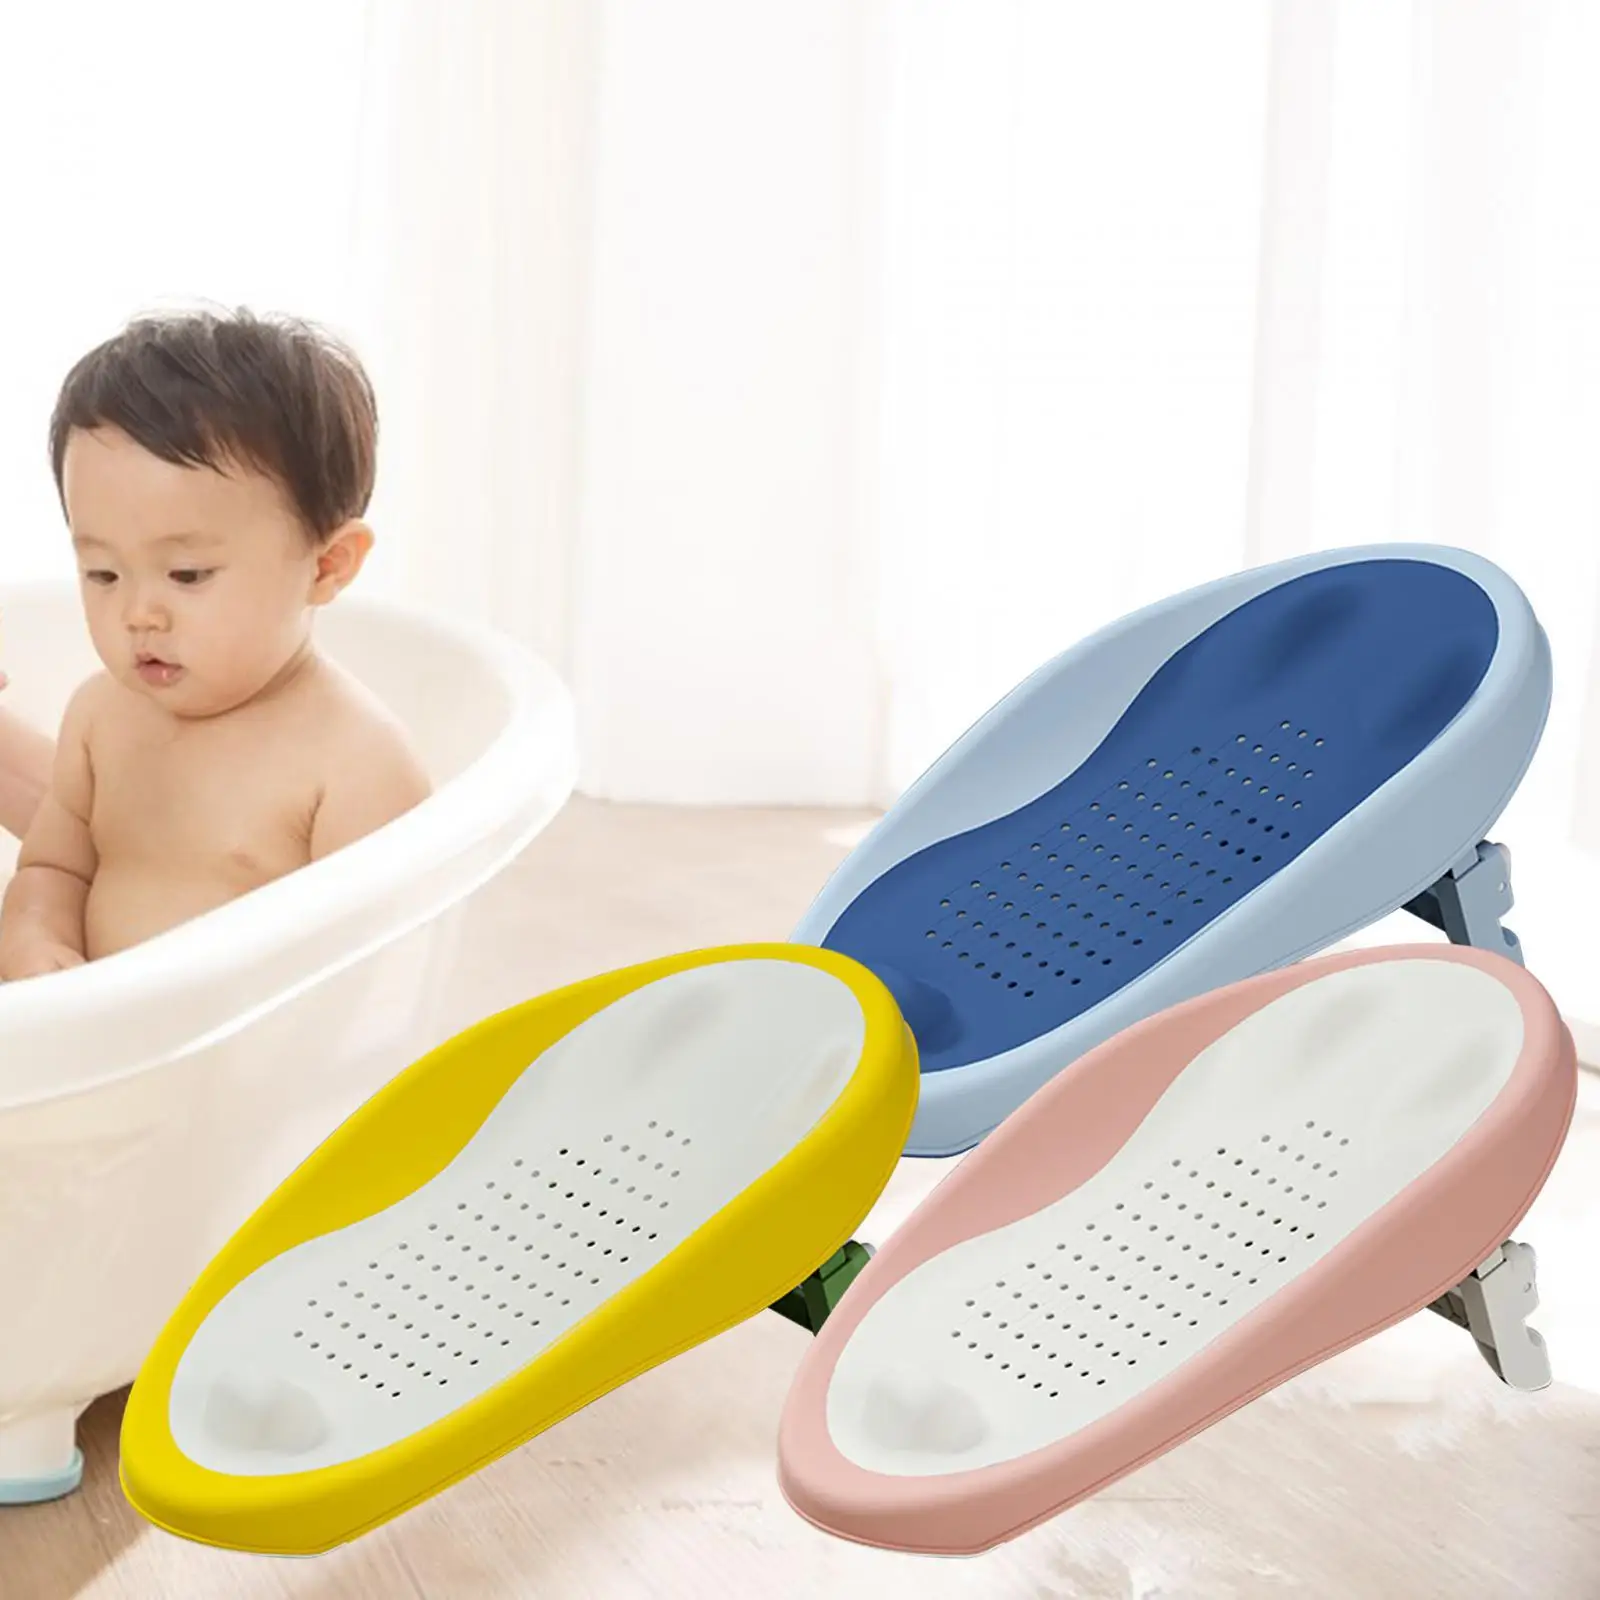 Baby Bath Support Use in The Sink or Bathtub Comfortable Bath Net for Infant